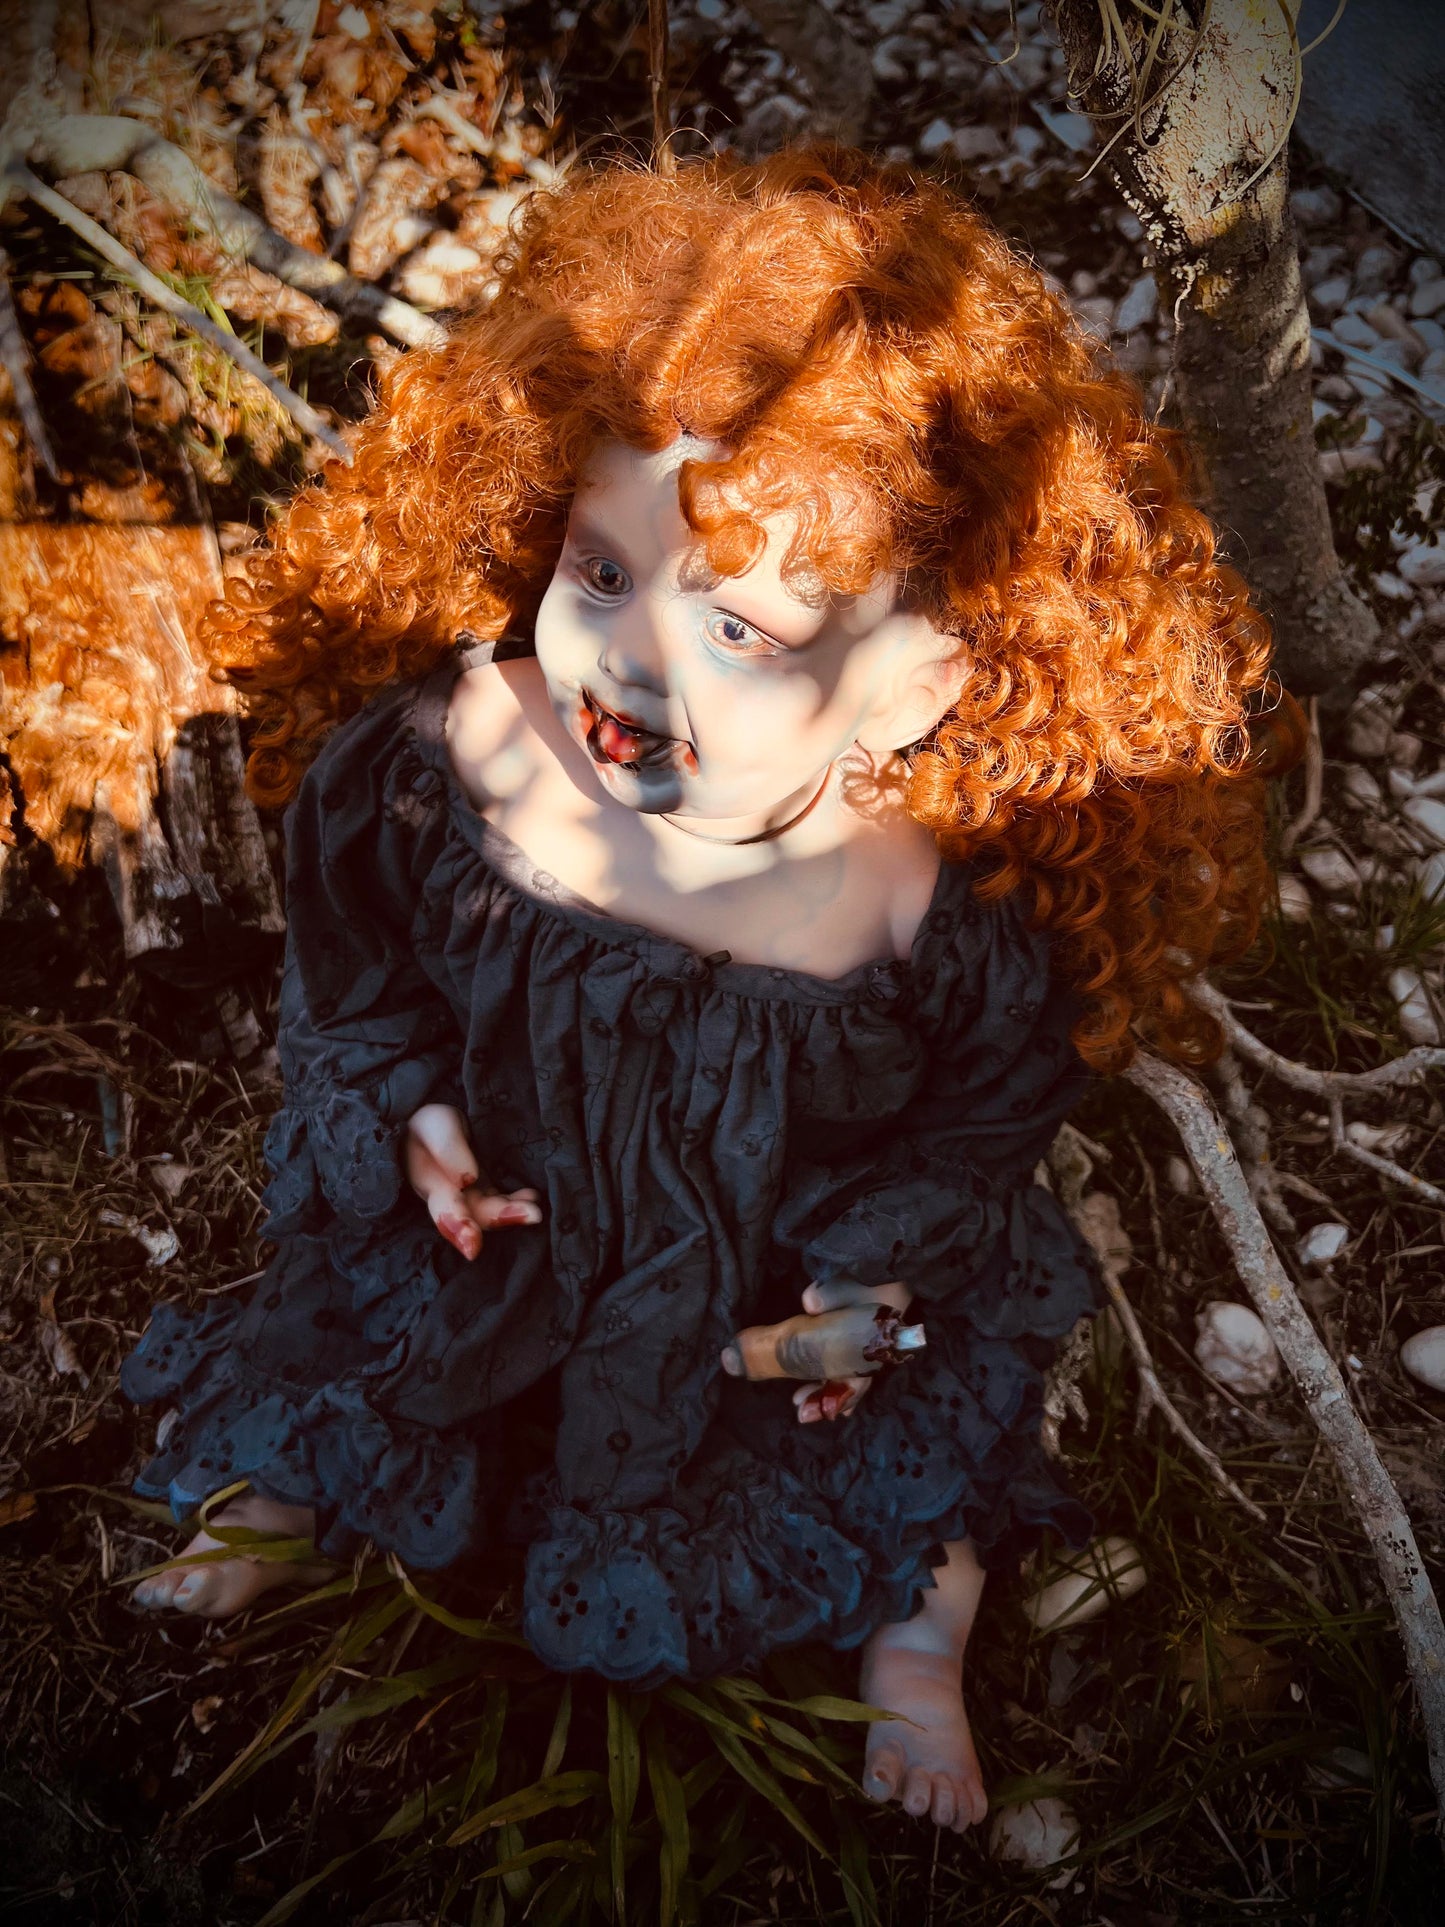 Meet Hazel 29" Vintage Baby Porcelain Ginger Witchy Haunted Spirit Infected Zombie Doll Scary Poltergeist Halloween Spooky Hand Painted